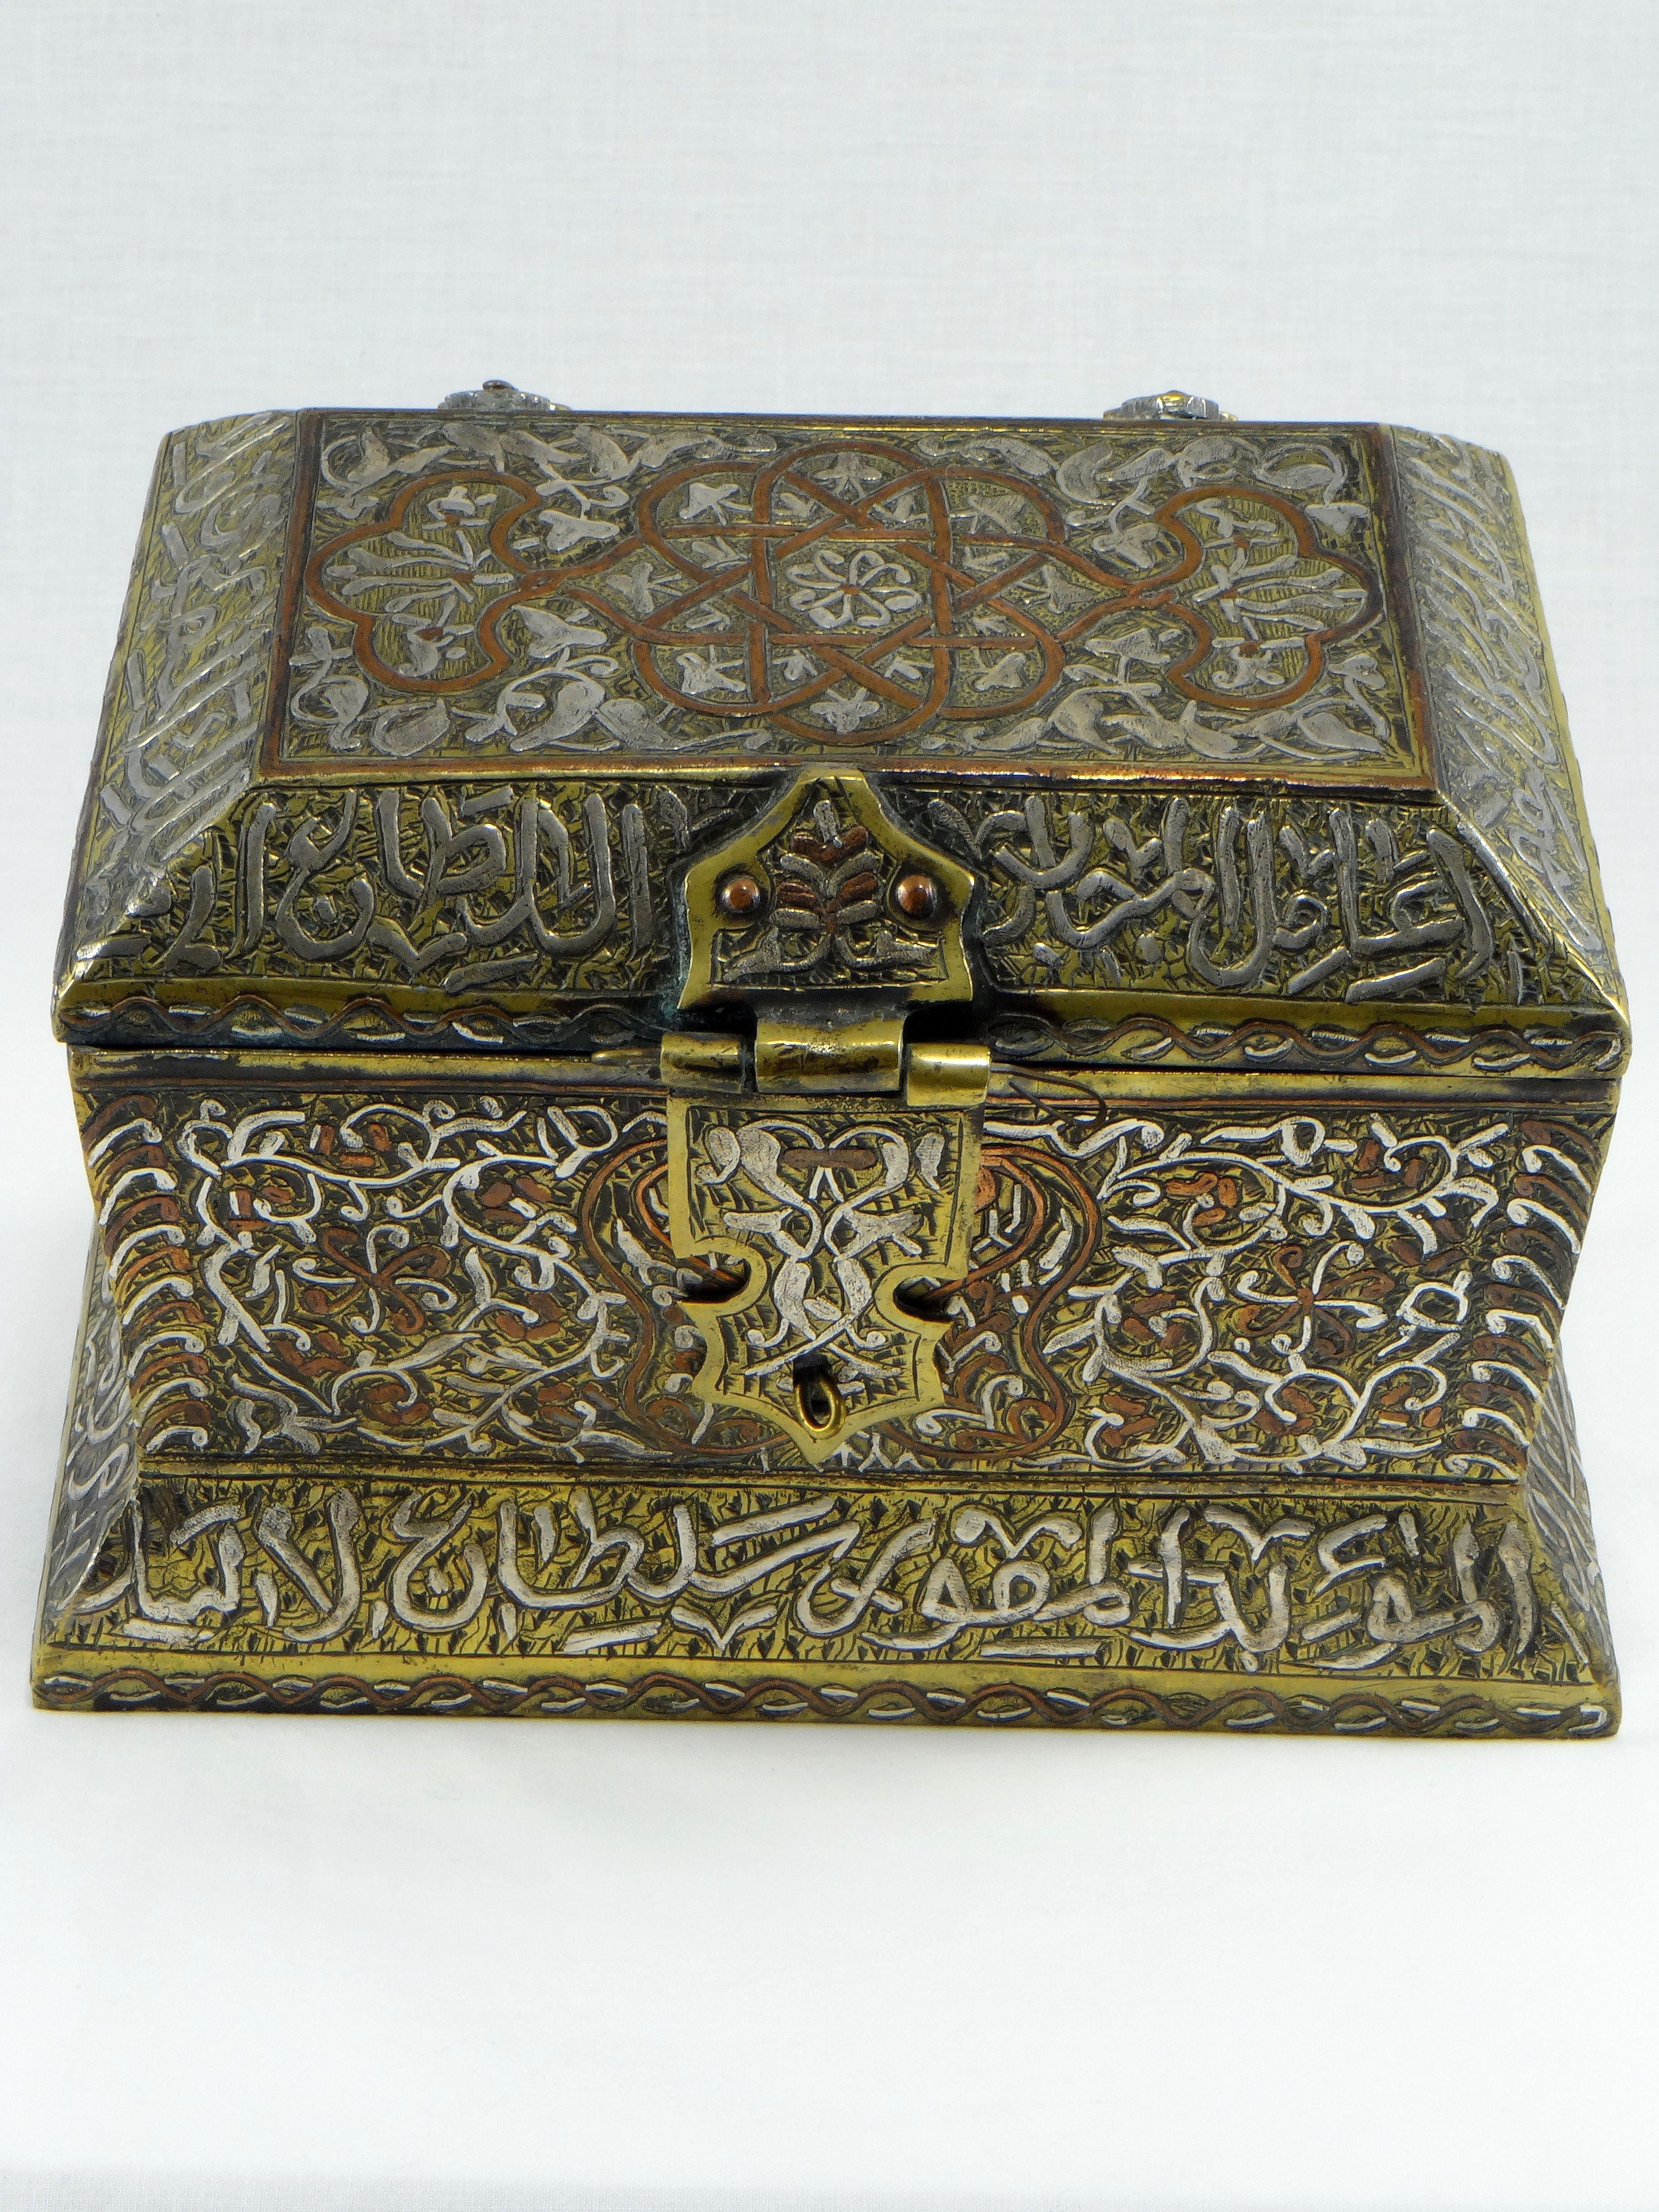 Inlay Bronze Box Inlaid with Silver and Copper, Syria, 1900s-1920s